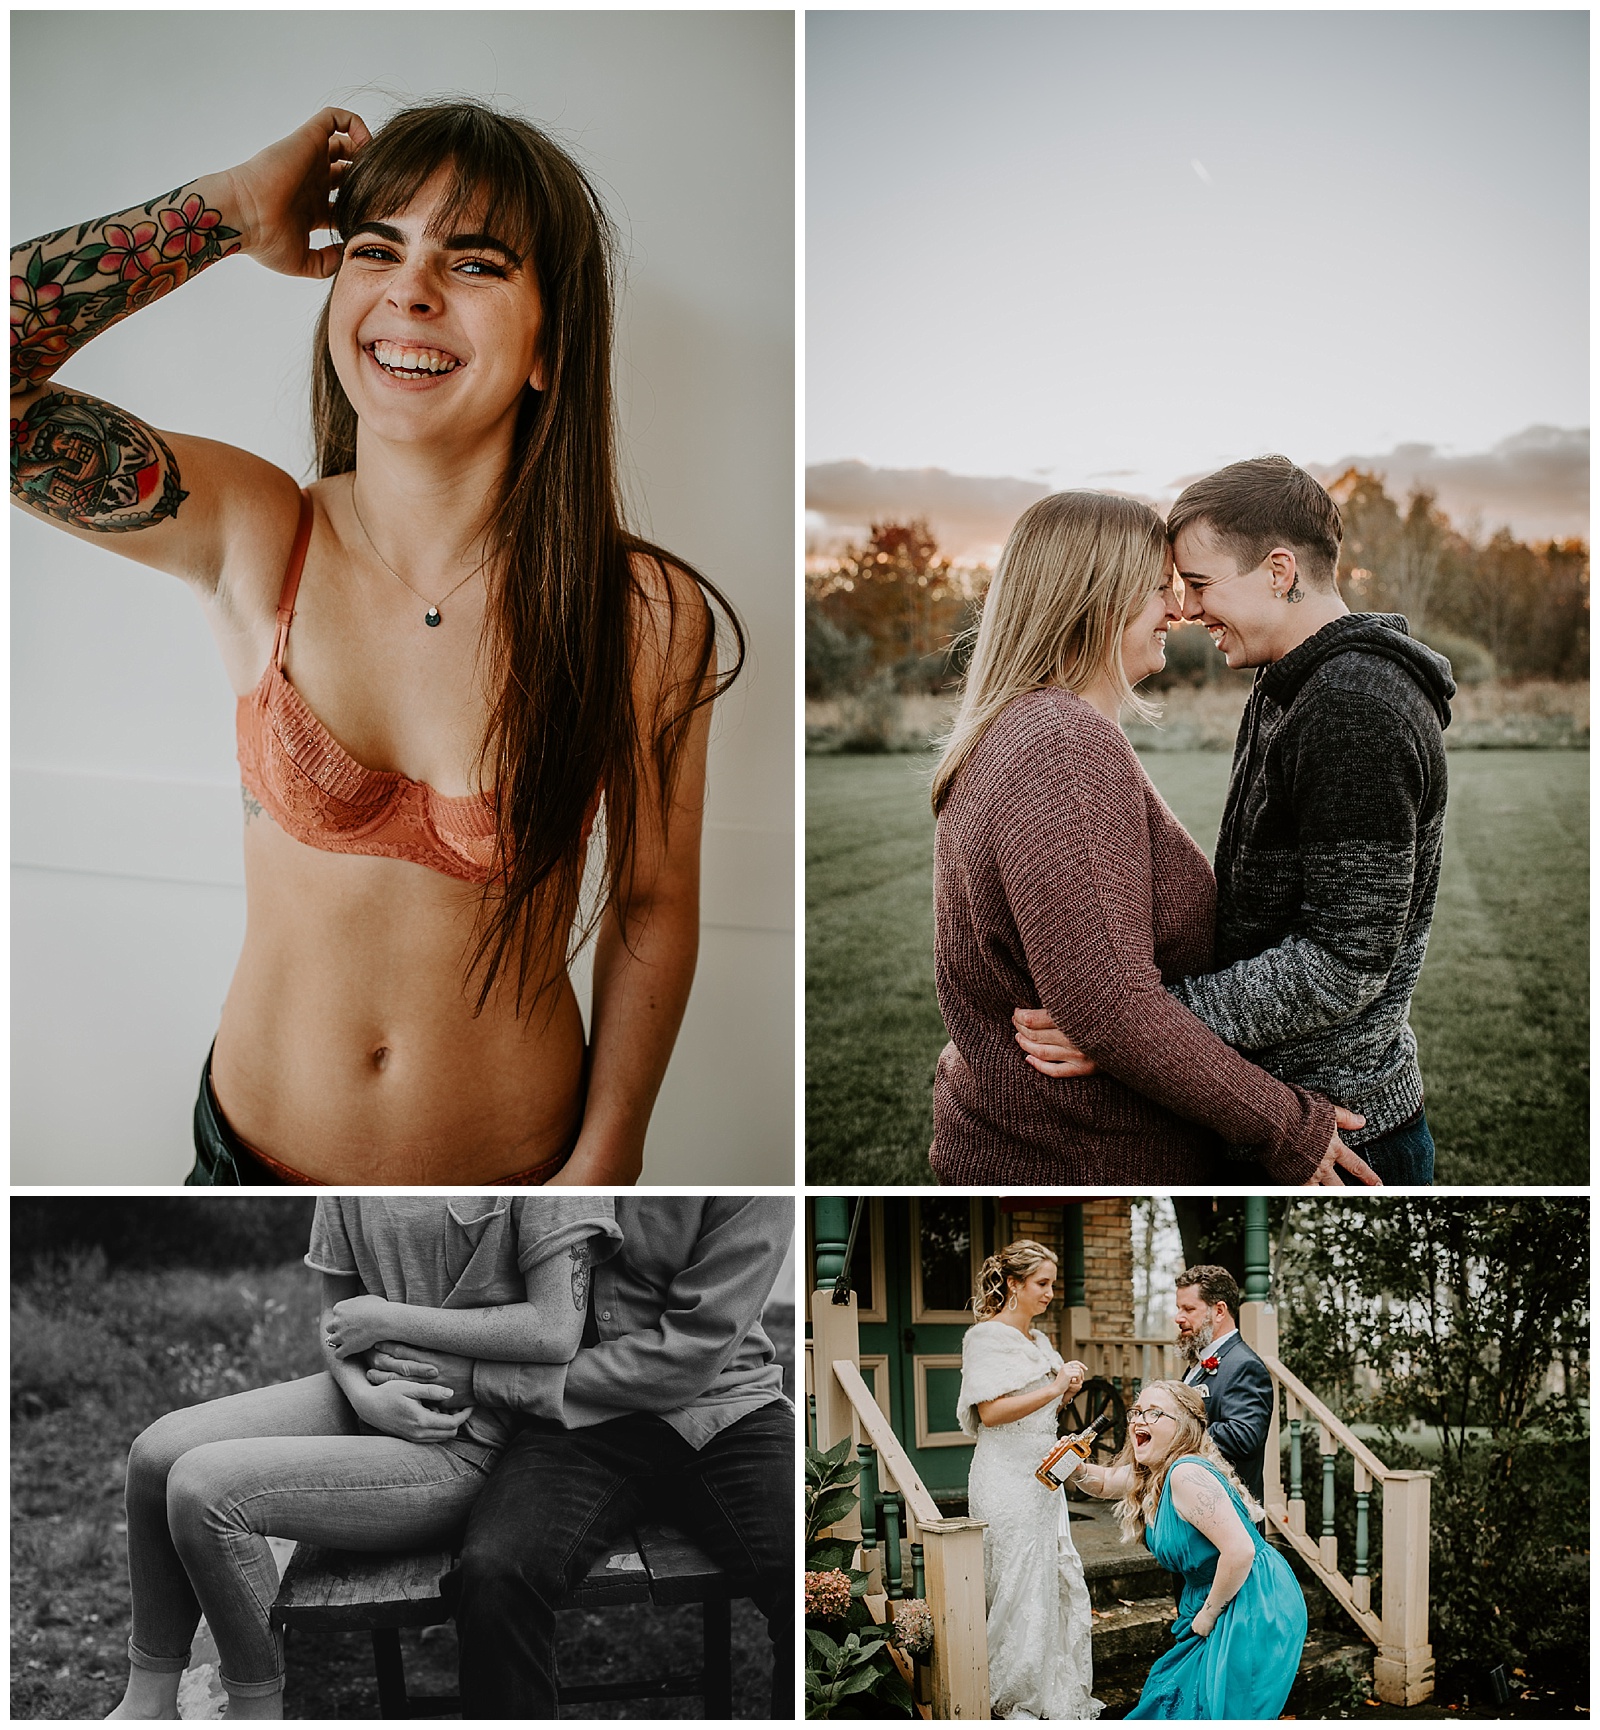 Liv Lyszyk Photography Best of Grand Rapids Wedding Photography Photographers LGBTQ queer weddings and elopements